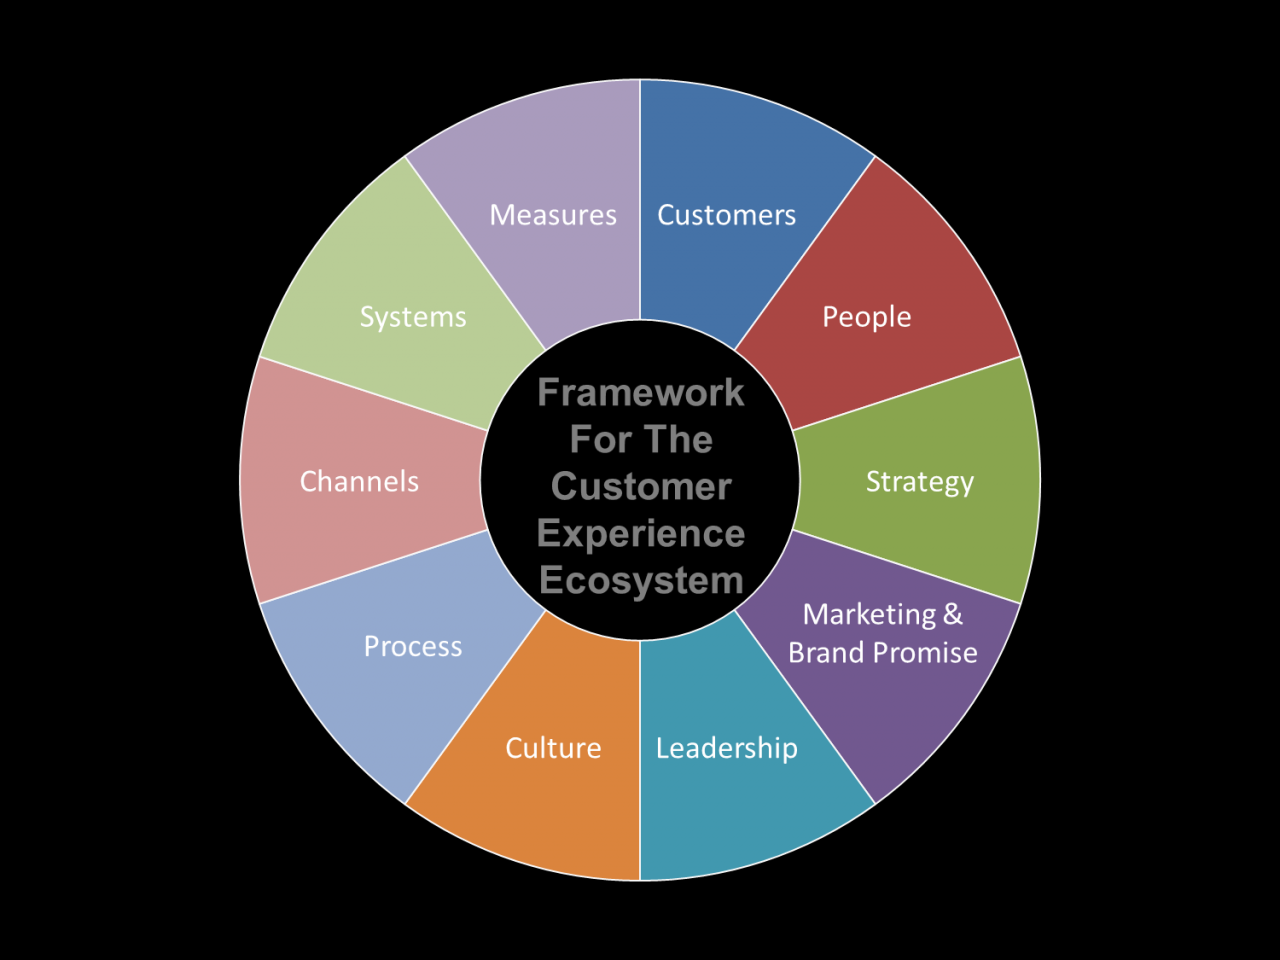 Customer experience management in retailing an organizing framework